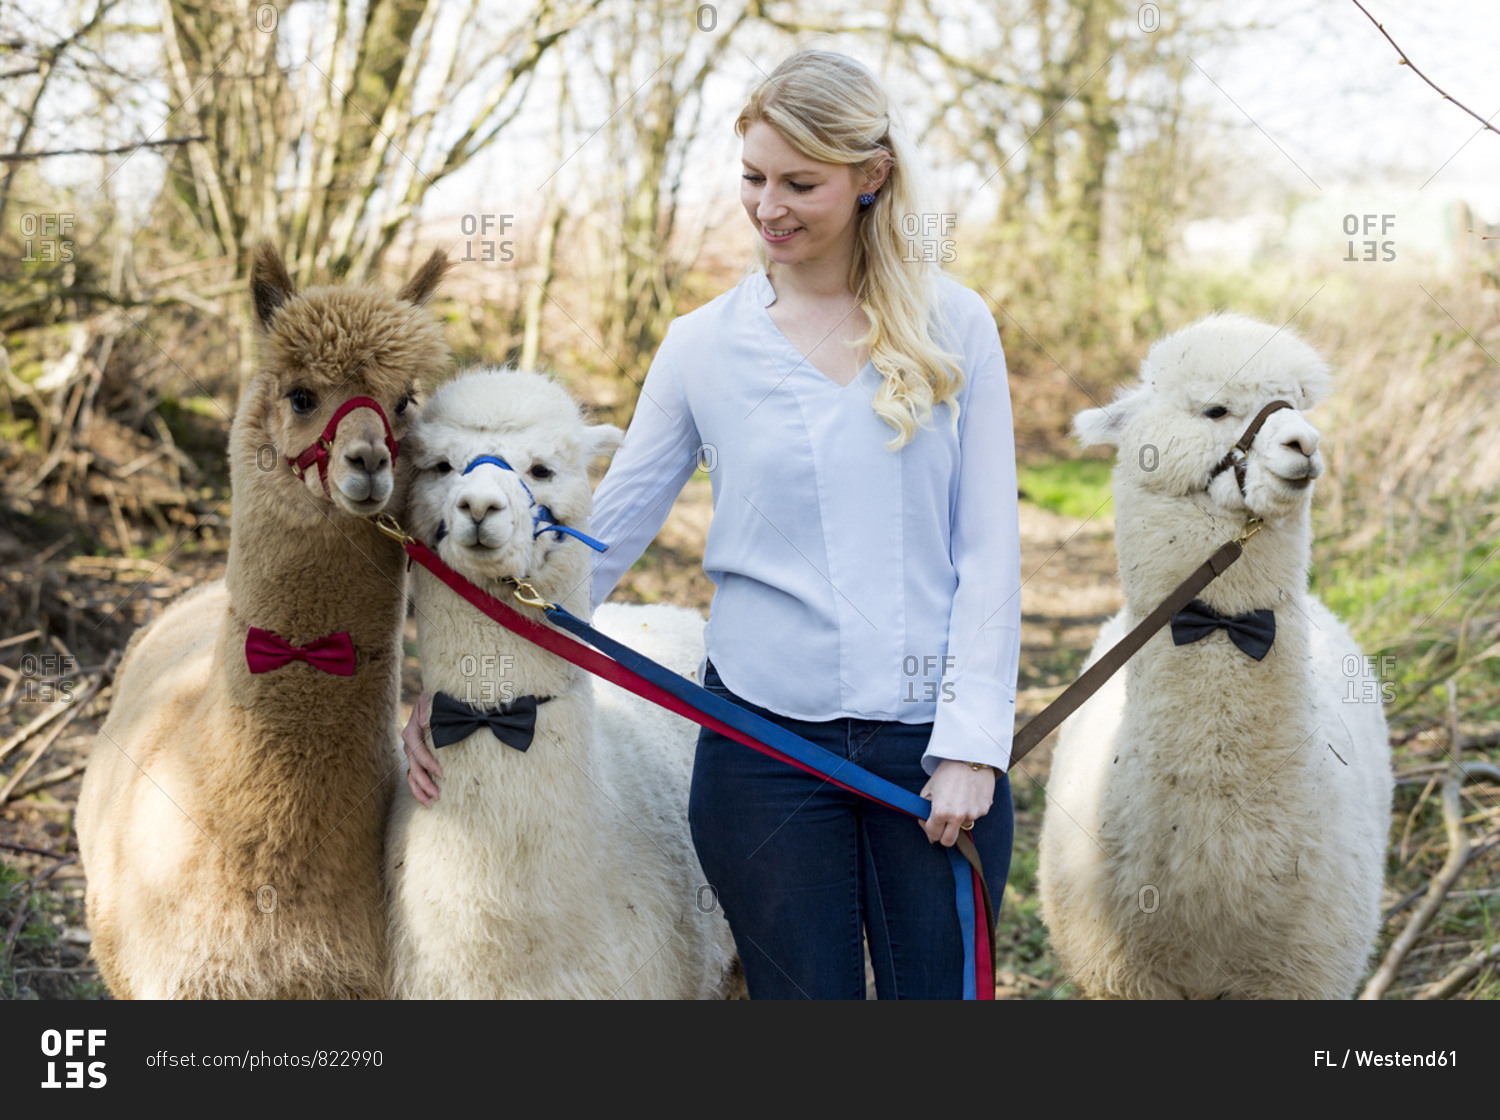 Smiling woman with three alpacas wearing bridles and bow ties